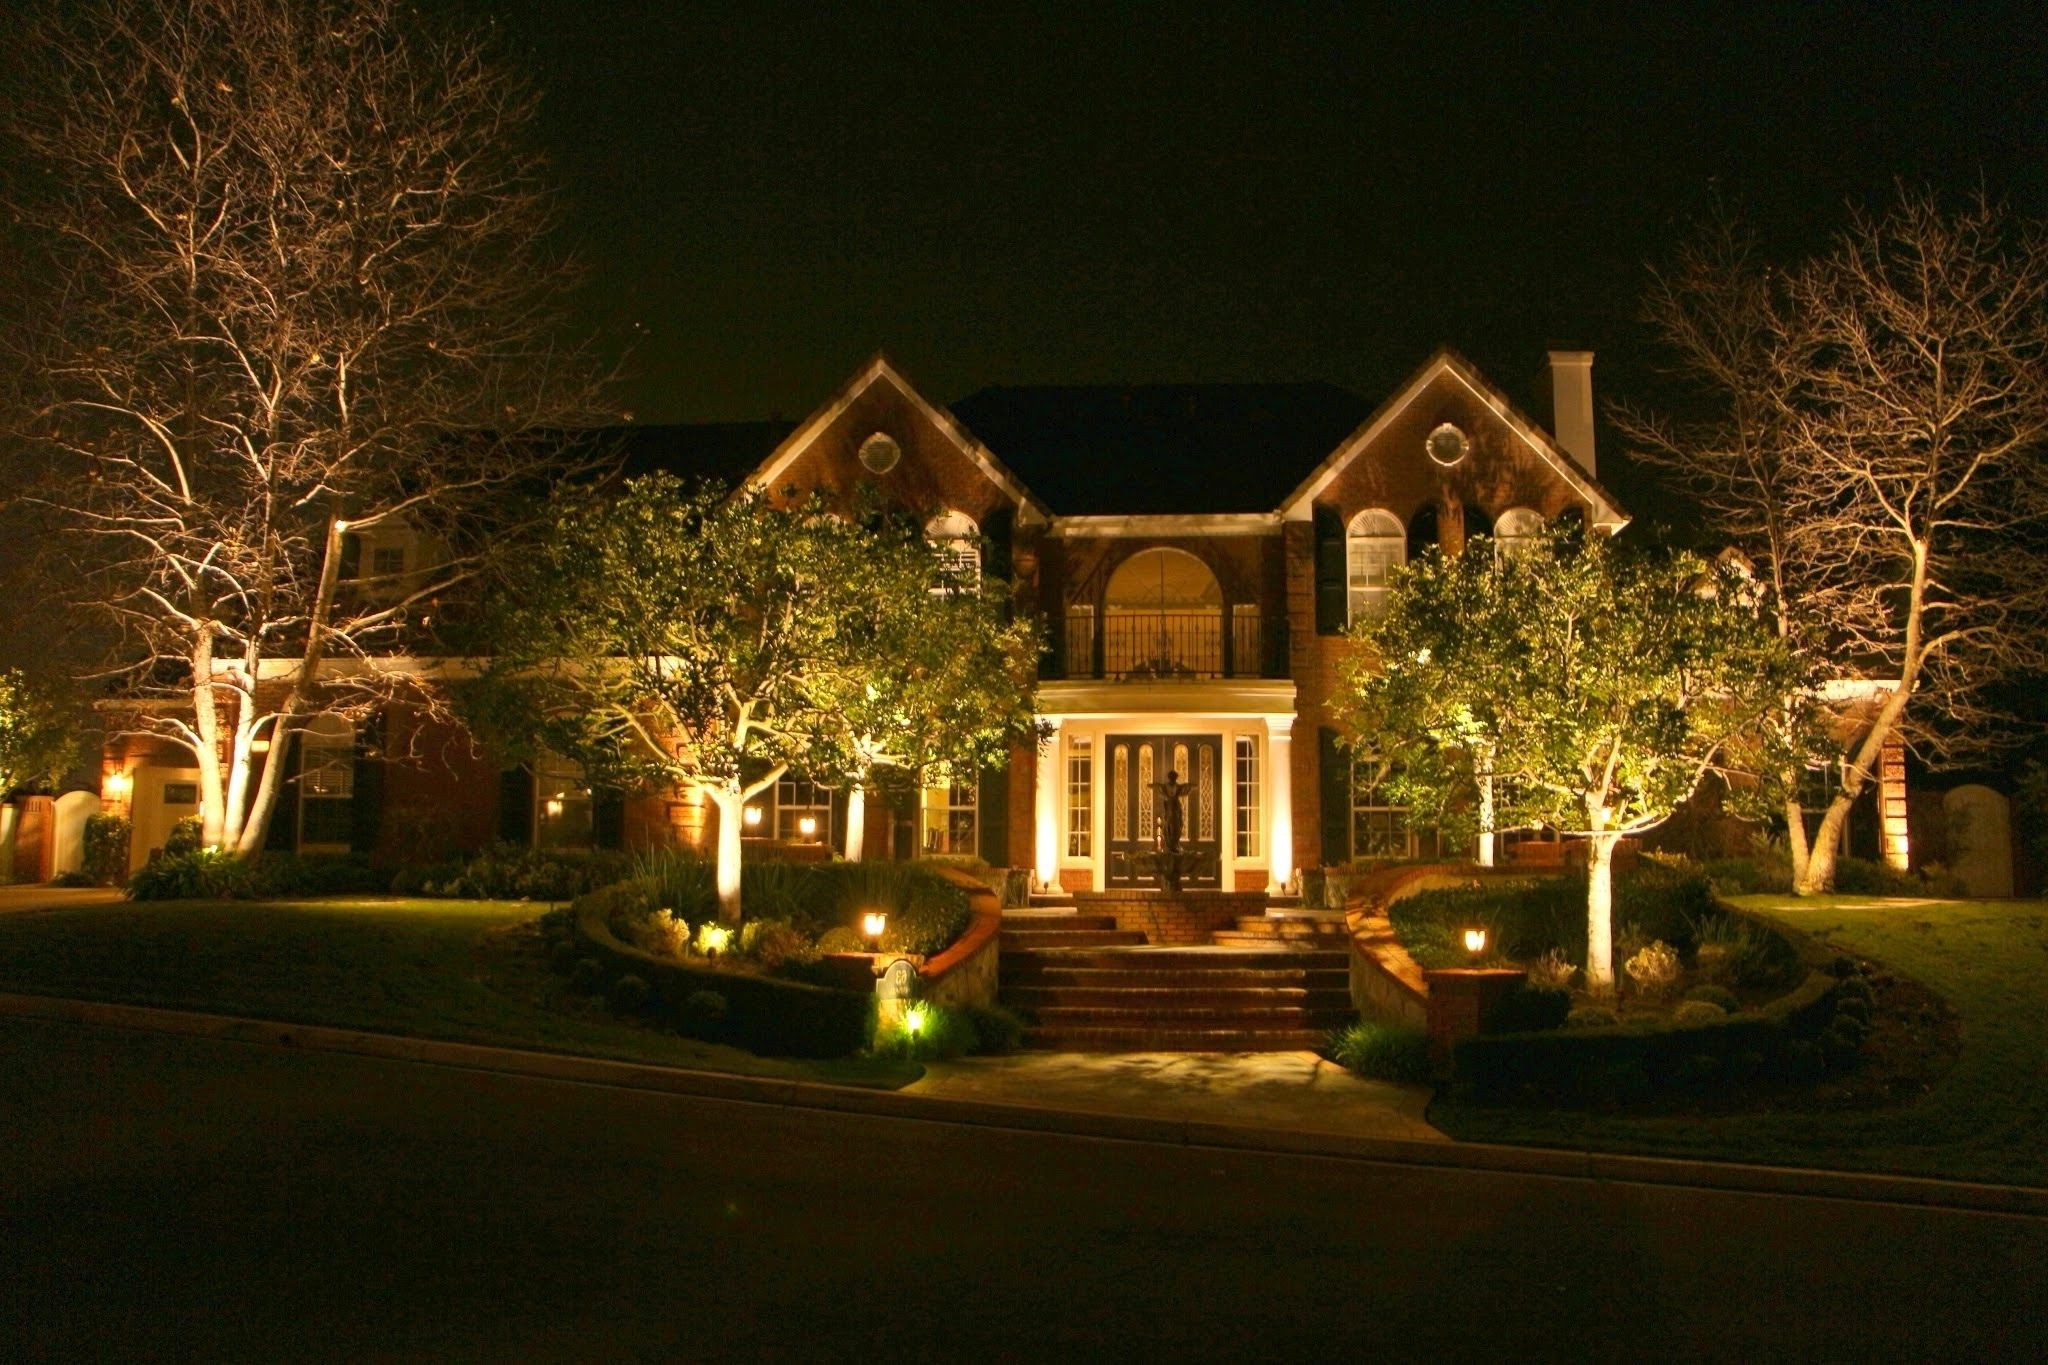 Kichler Outdoor Landscape Lighting With Regard To Well Liked Outdoor Landscape Lighting Fixtures For Home • Outdoor Lighting (View 15 of 20)